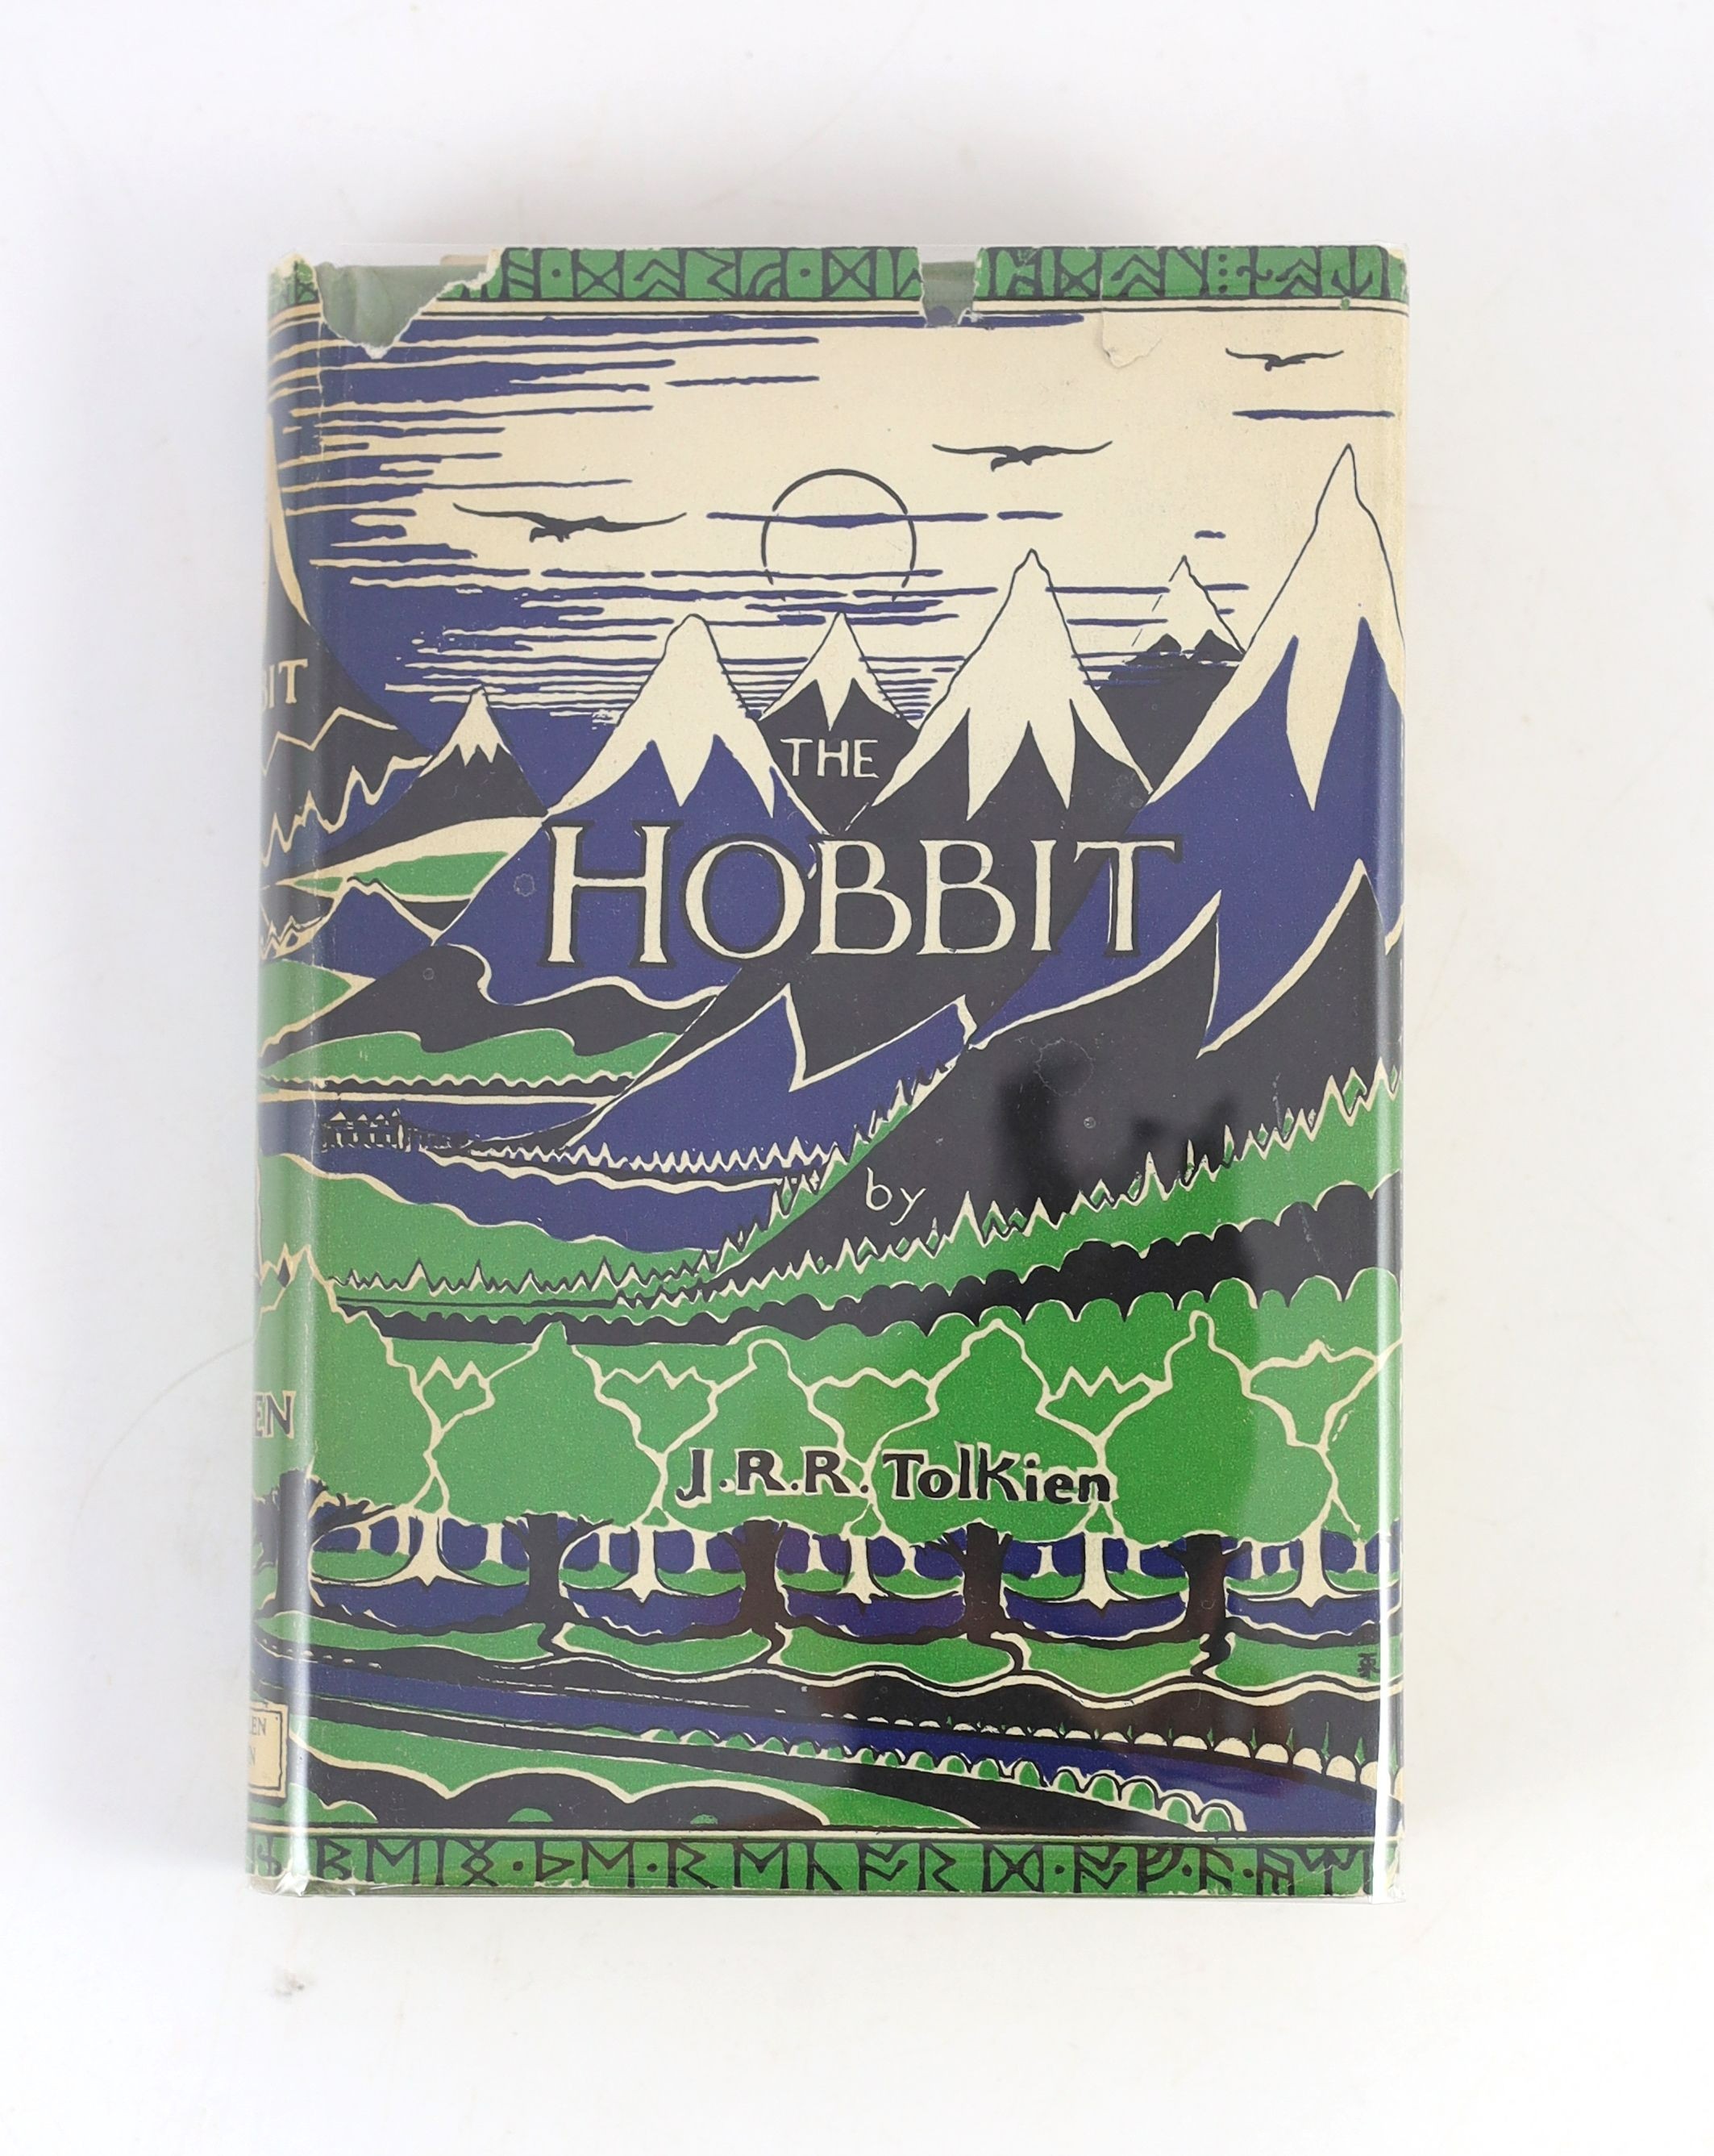 Tolkien, John Ronald Reuel - The Hobbit, 2nd edition, 15th impression, map endpapers, original green cloth in clipped d/j, with small tears and some loss, George Allen and Unwin, London, 1965